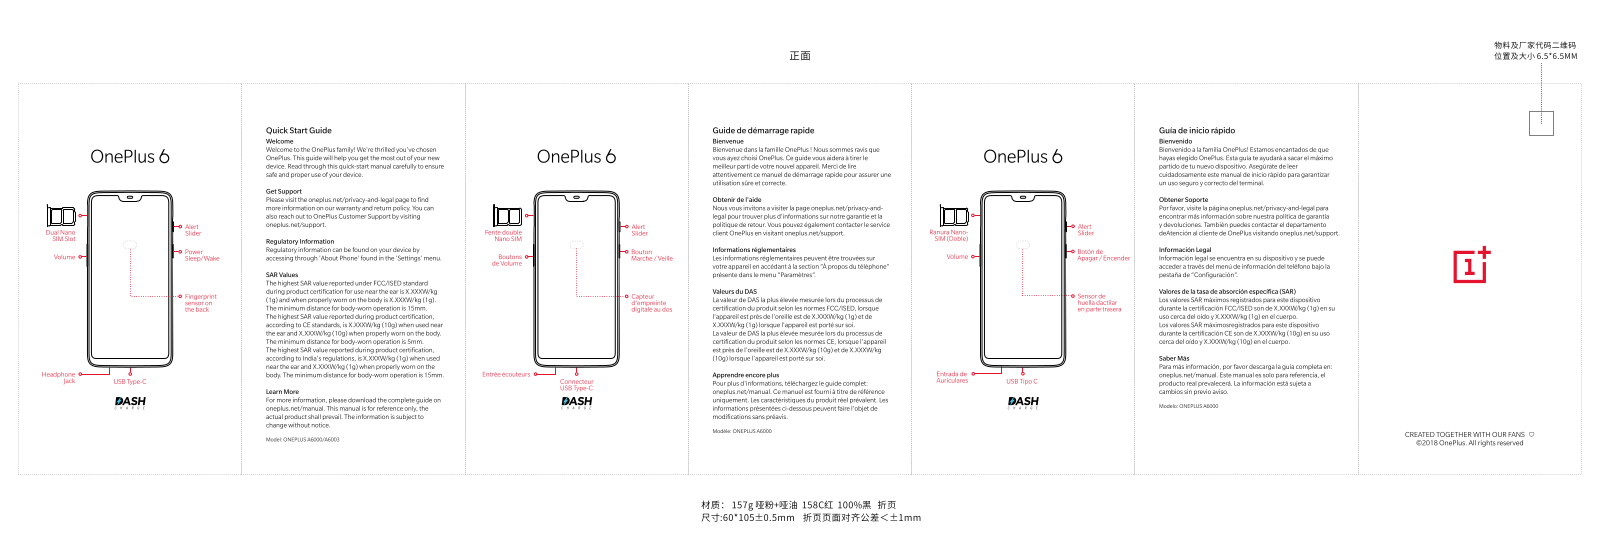 OnePlus Technology A6003 User Manual